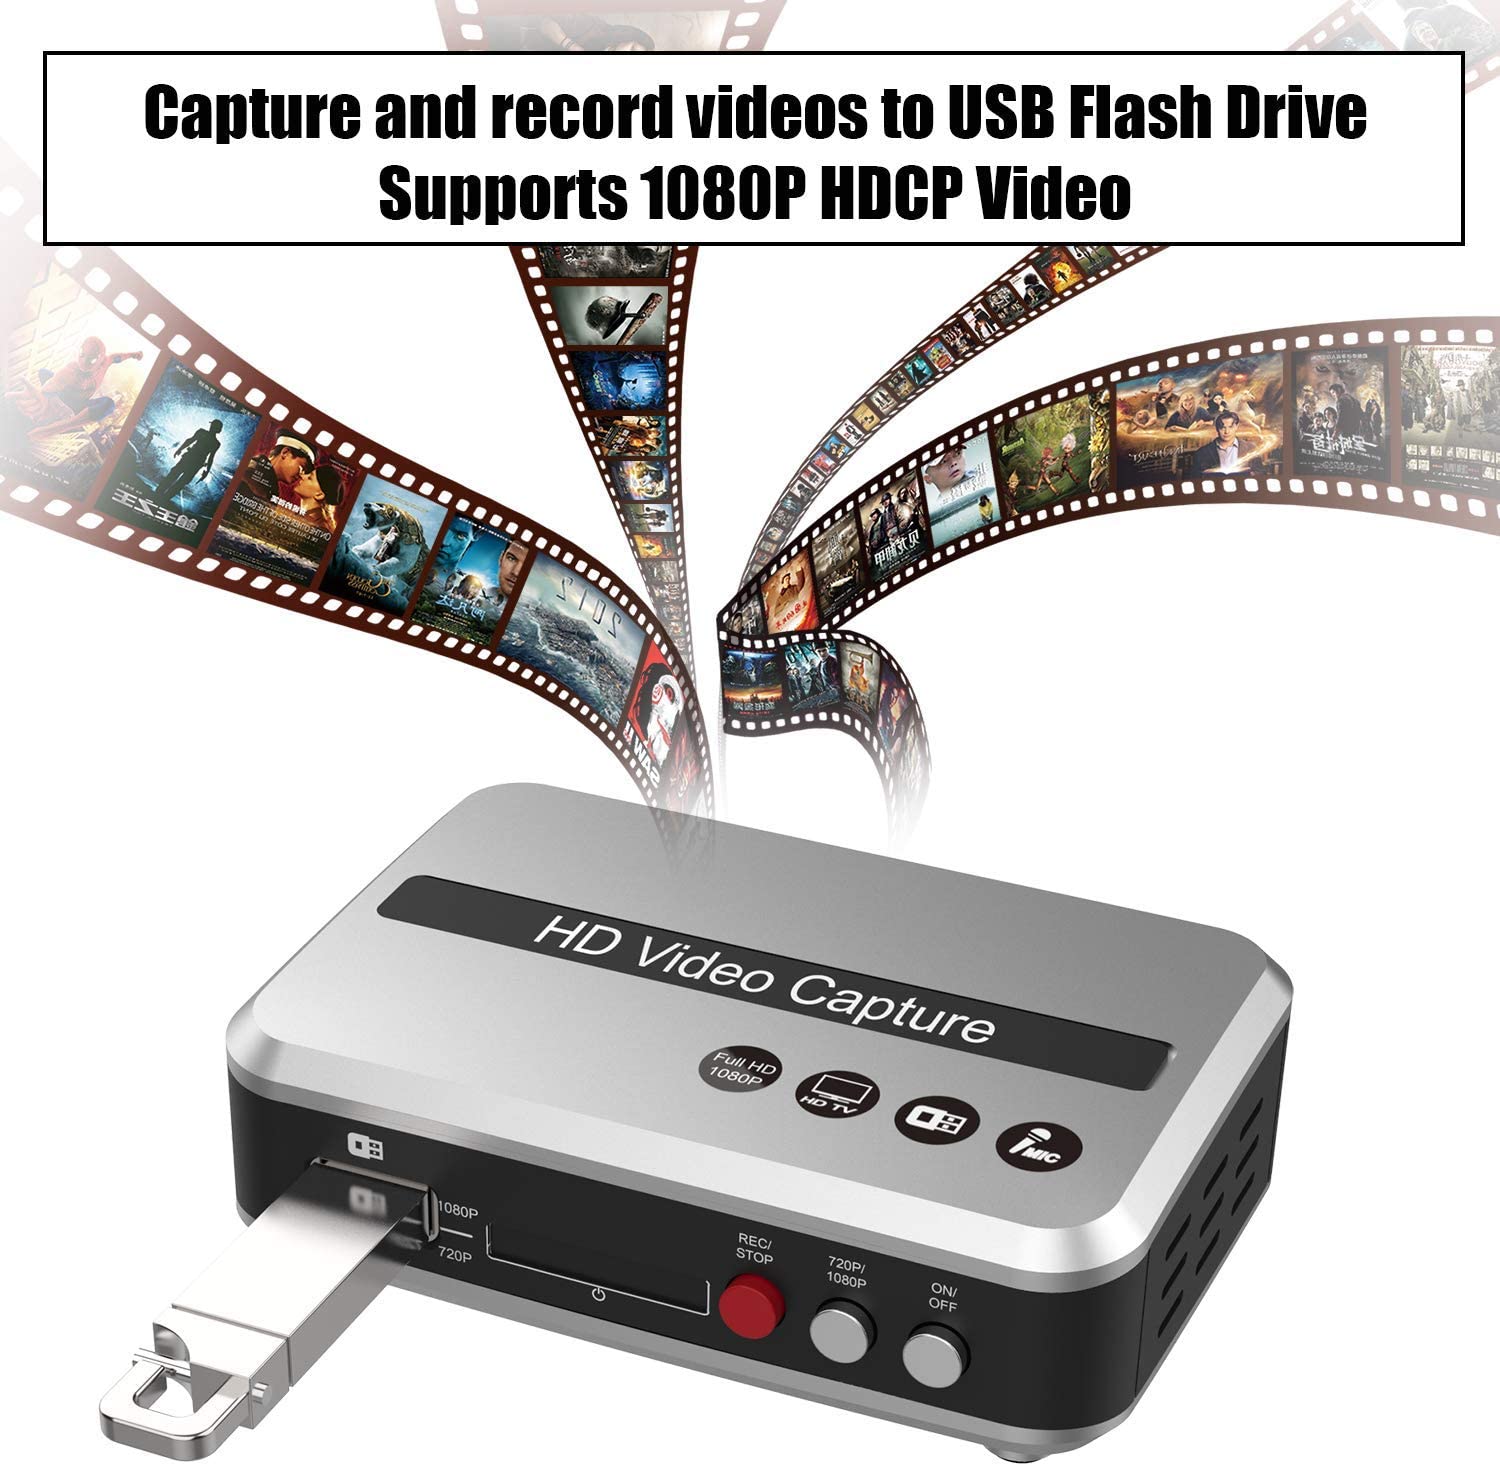 Fearless vinde videnskabelig DIGITNOW HDMI Video Converter Game Capture/HD, Video Capture  Device/Recorder for PS4, Xbox One/Xbox 360,LiveTV,PVR DVR, Support HD Video  HDCP 1080P and Mic in(No Computer Required)-HD Video Record Box-DIGITNOW!